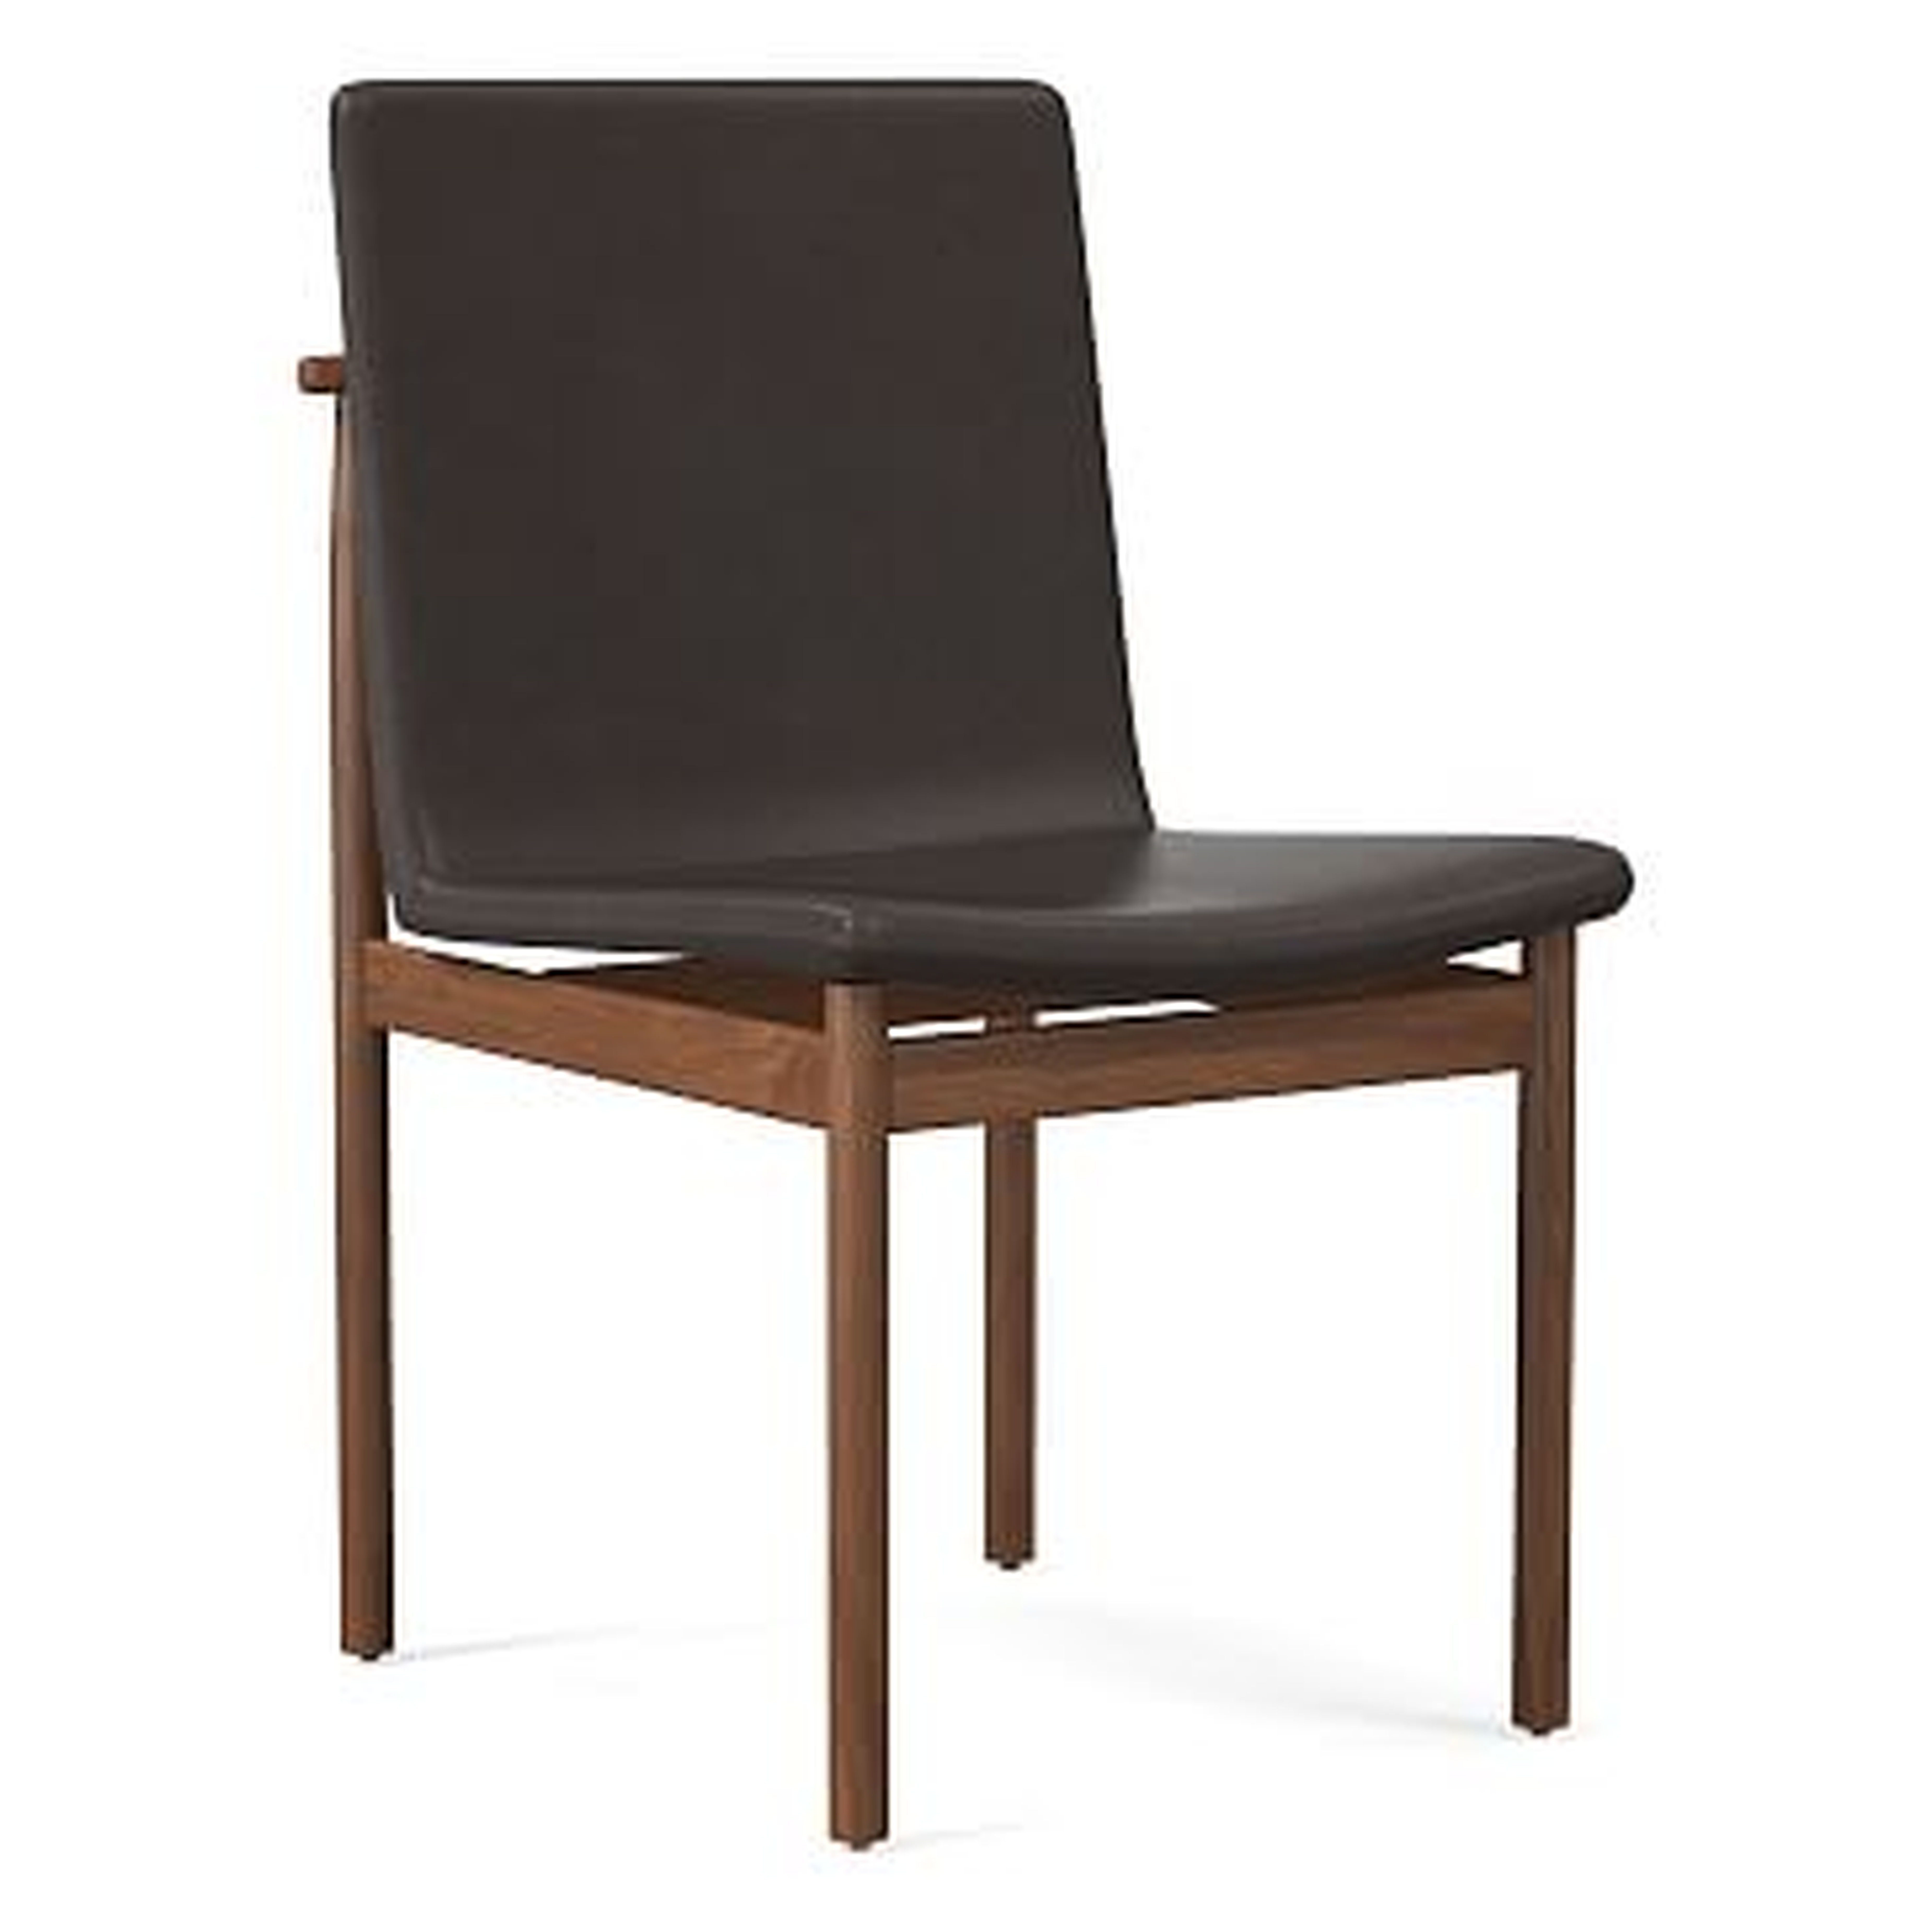 Framework Leather Dining Chair, Sauvage Leather, Walnut, Charcoal - West Elm